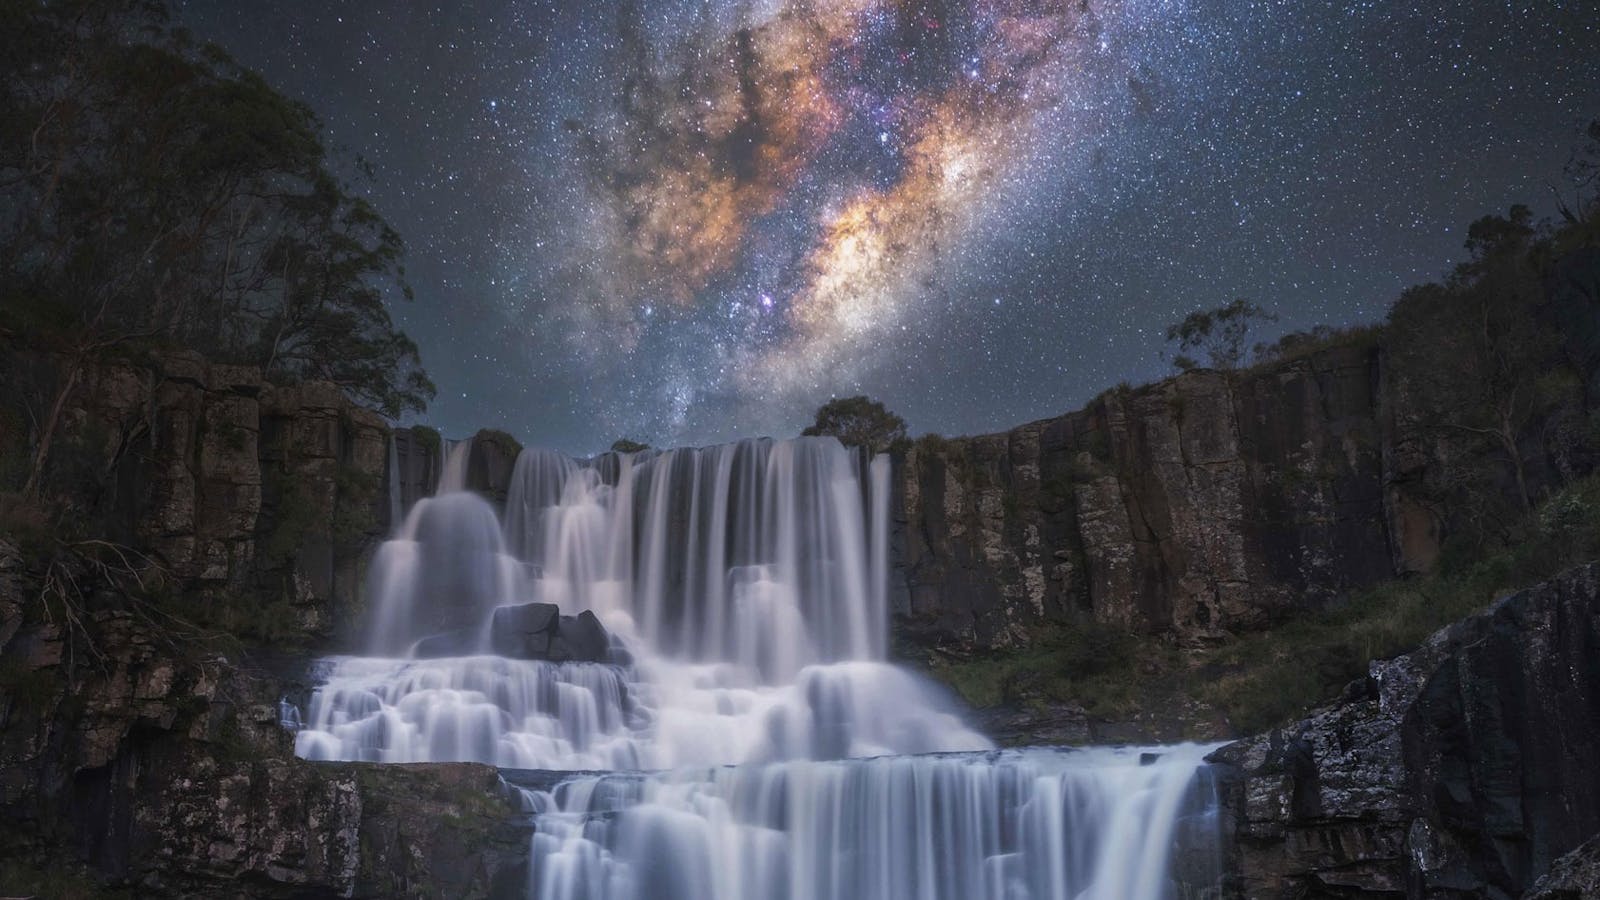 Learn how to photograph the Milky Way